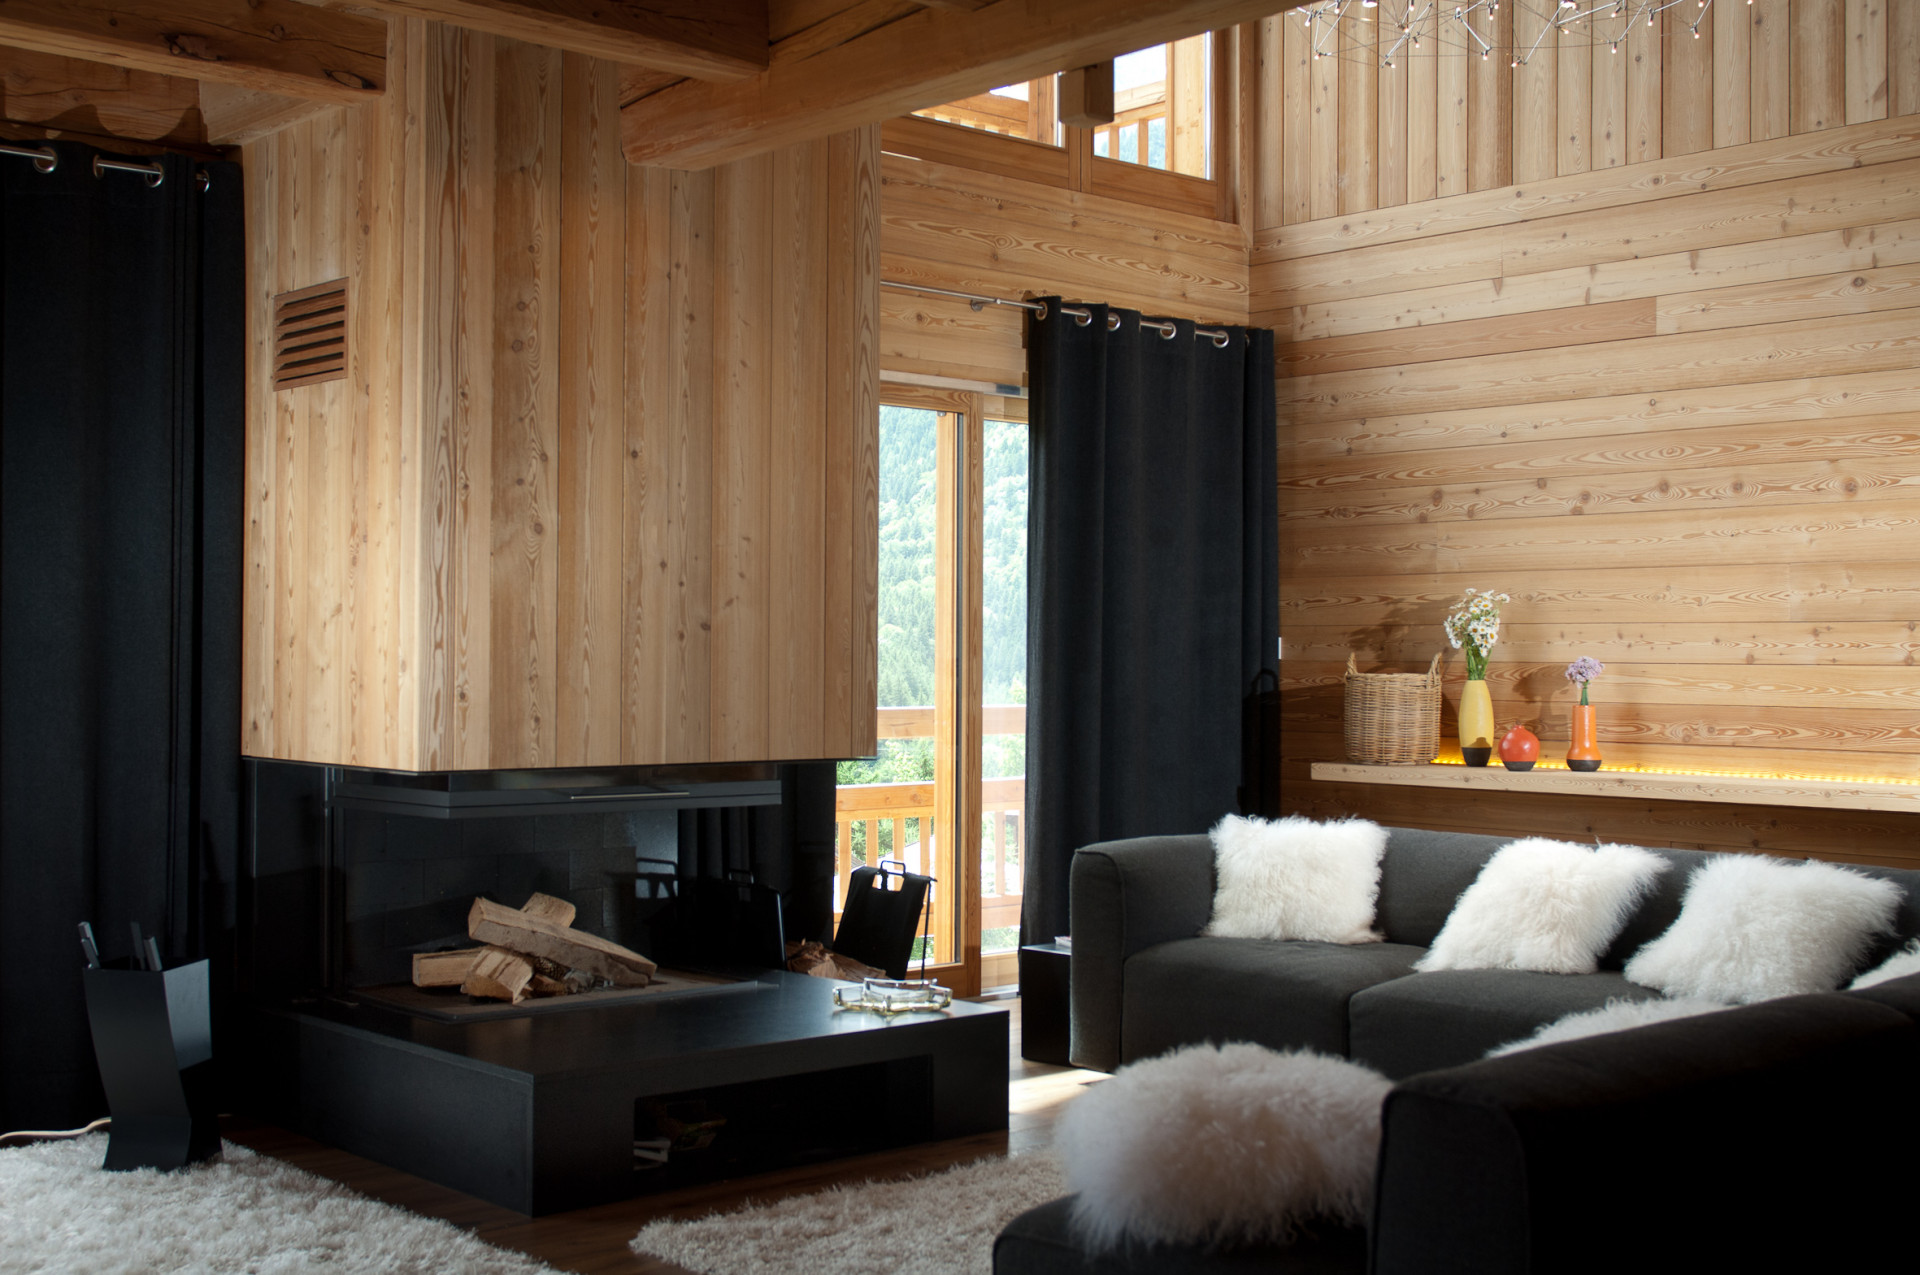 Self-catering chalet in Serre Chevalier